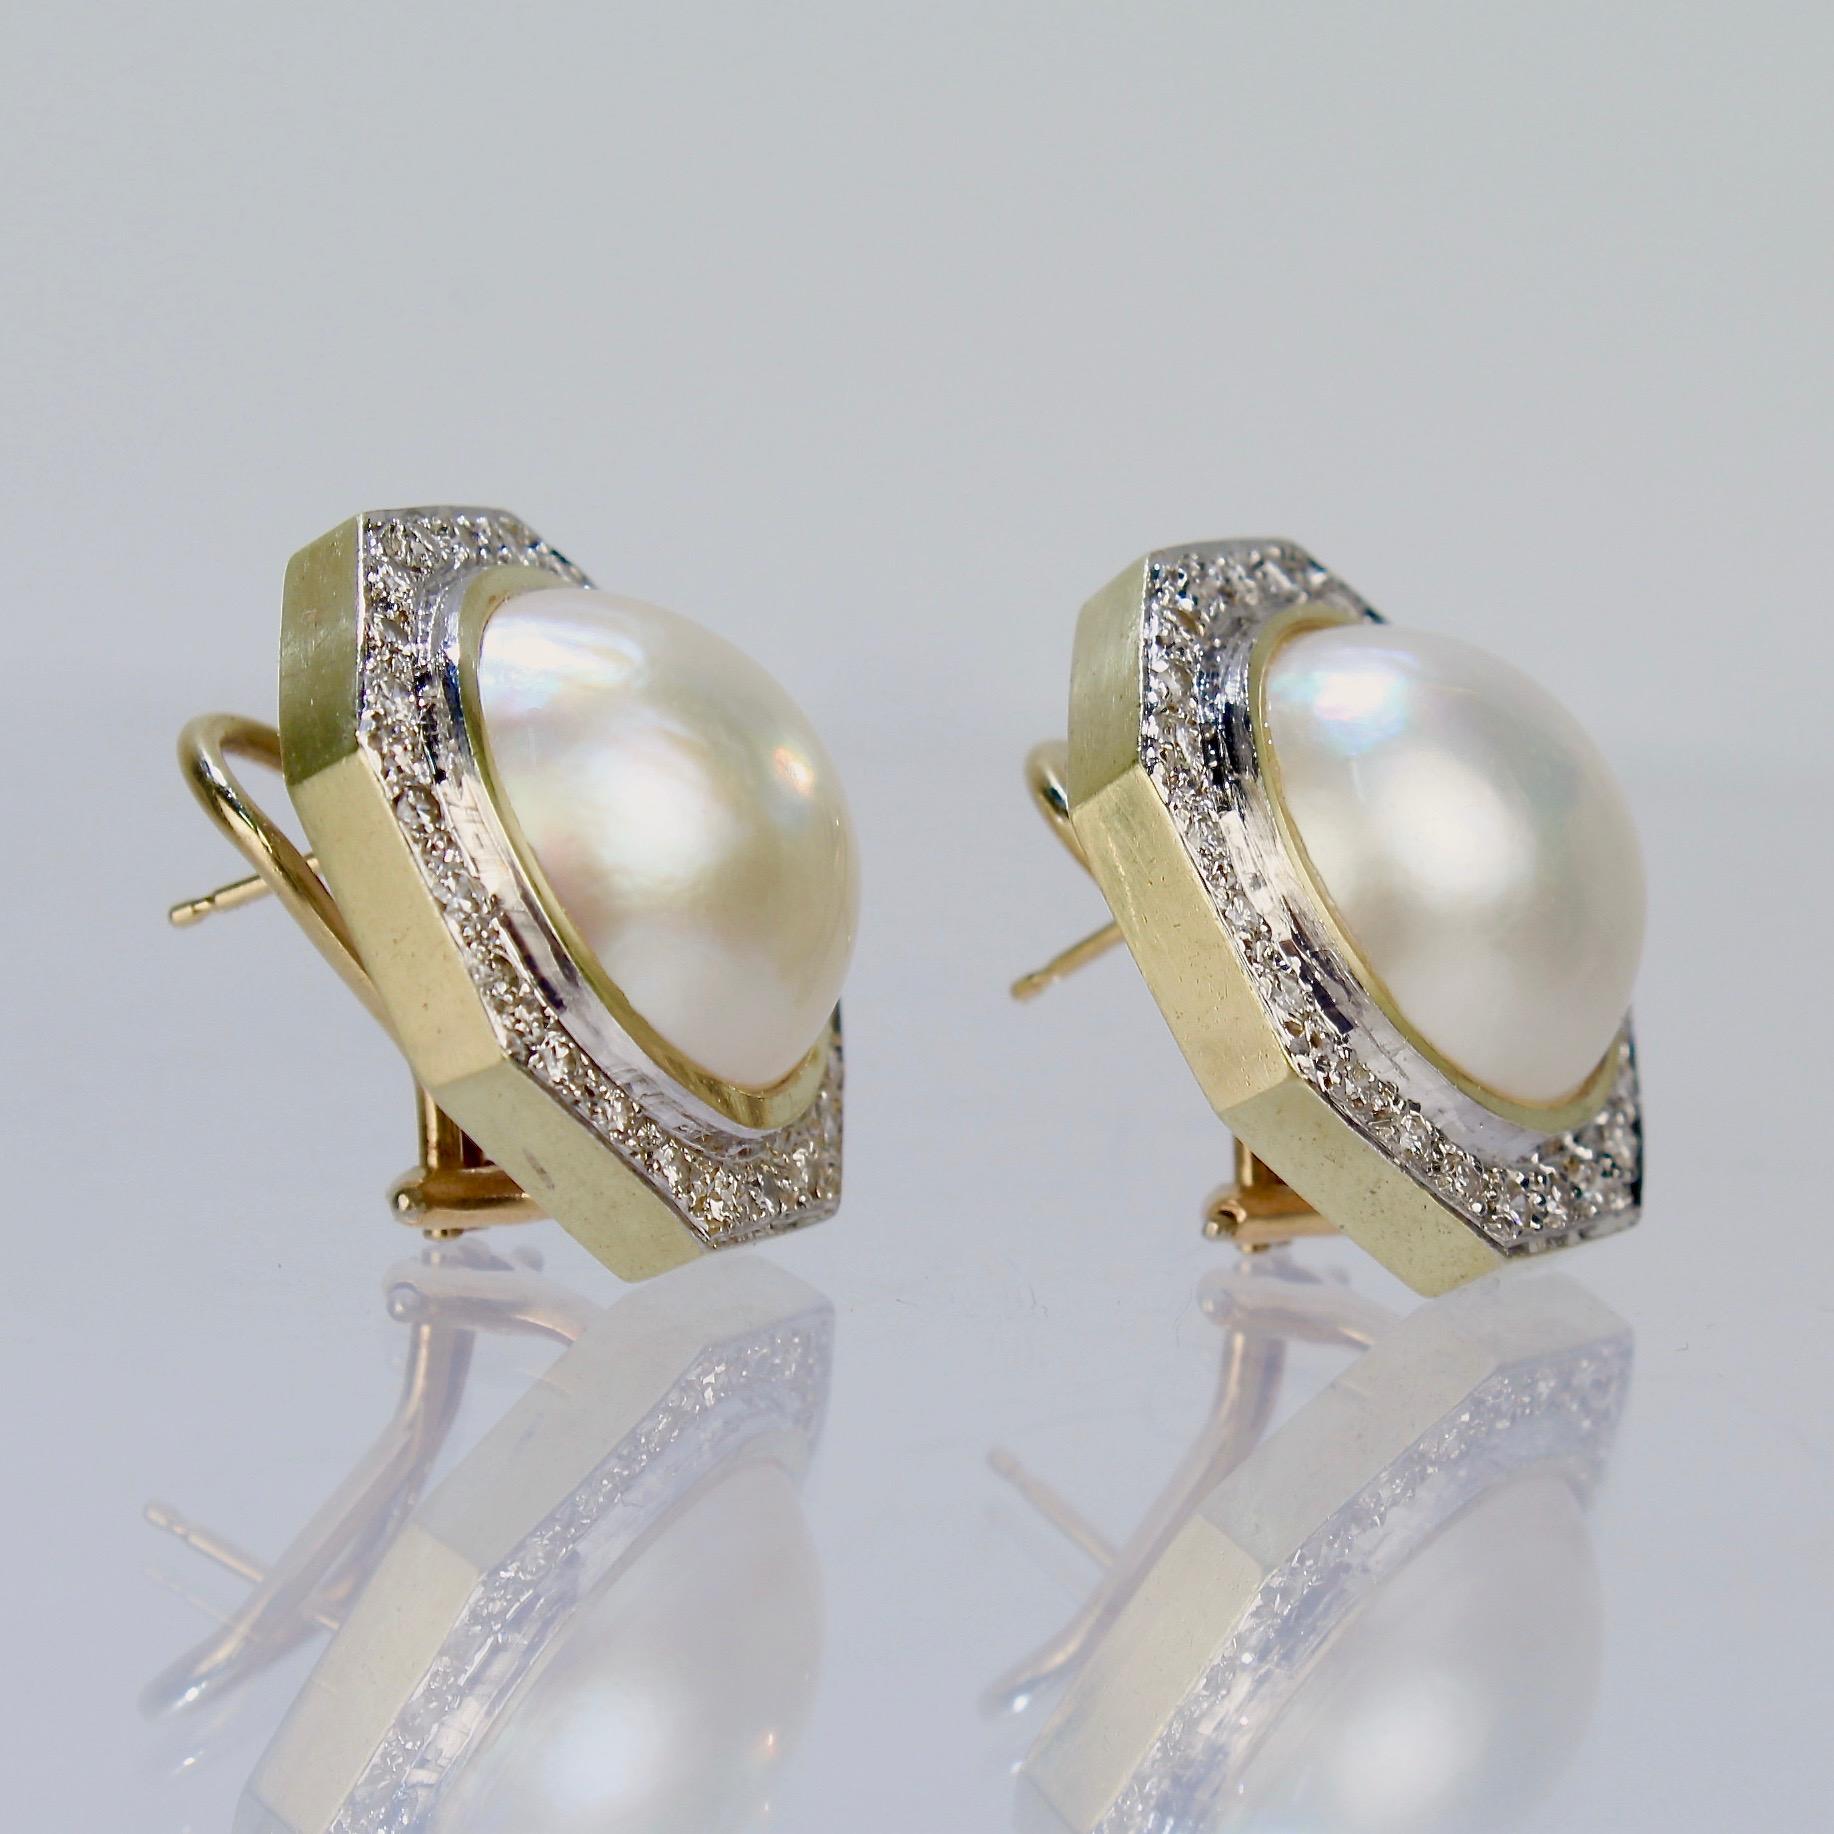 Women's Retro 1980s Style 14 Karat Gold, Diamond, and Mabe Pearl Omega Clip Earrings